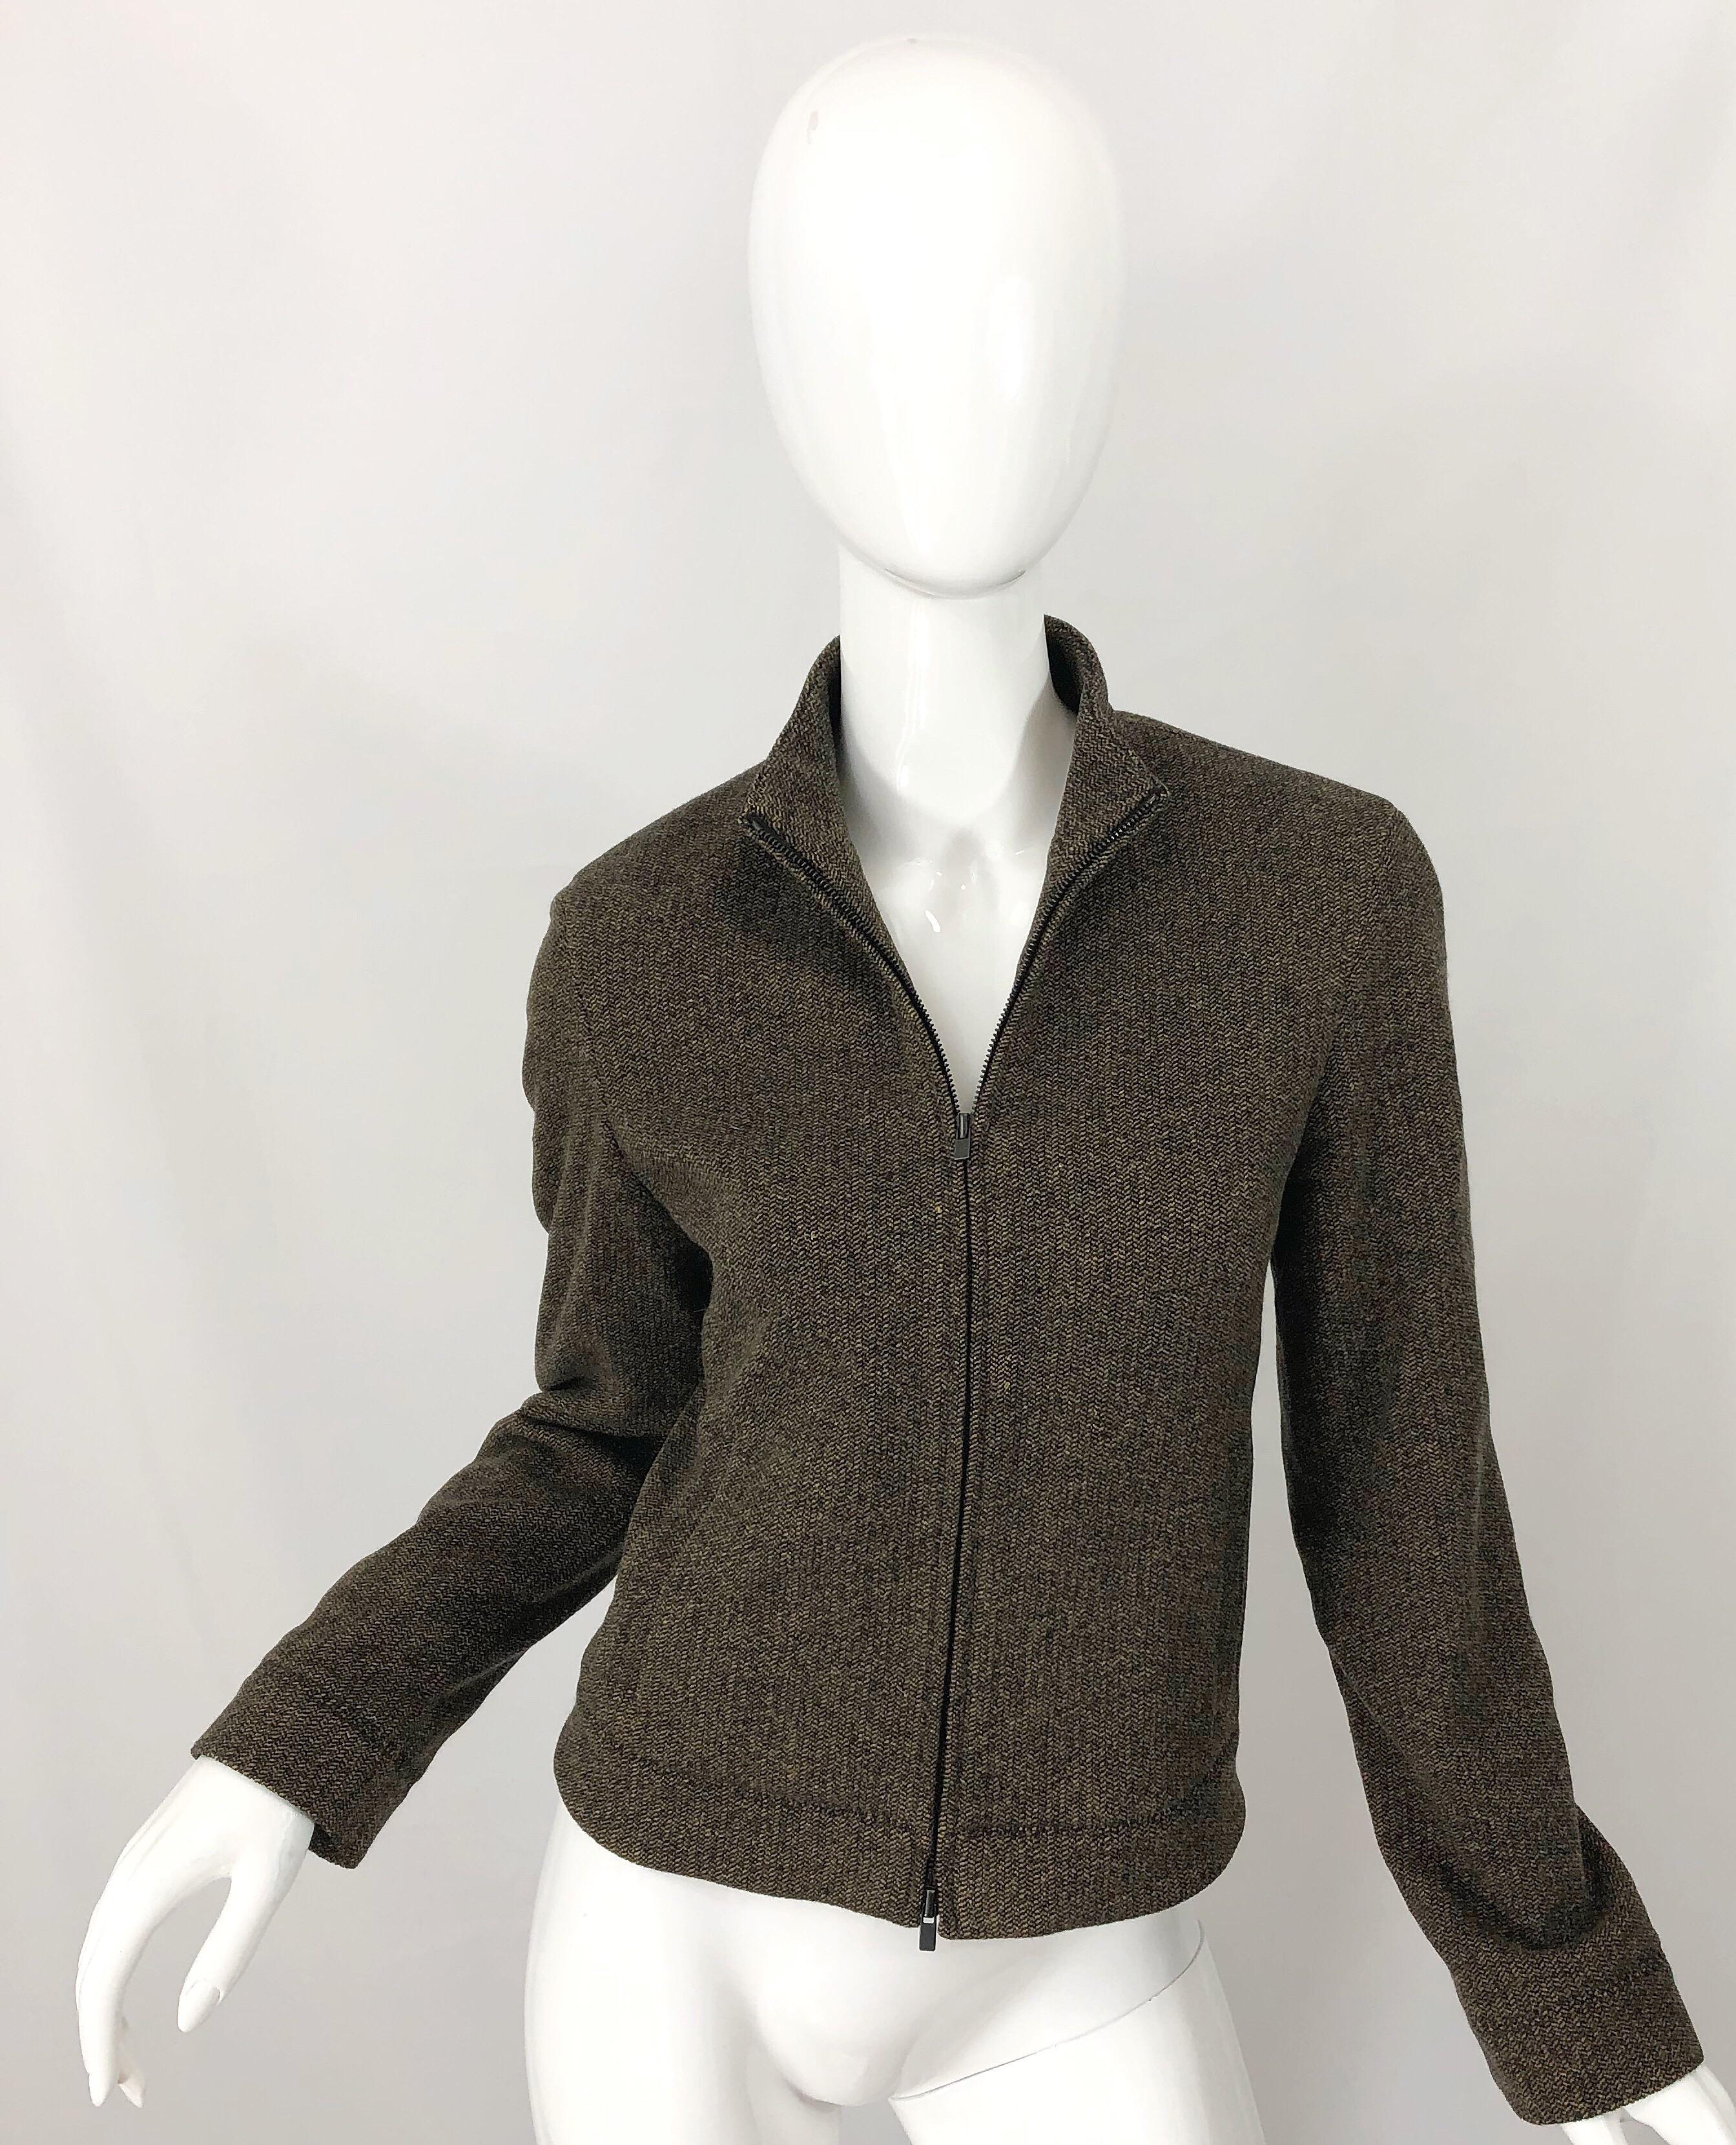 Chic vintage 1990s CALVIN KLEIN COLLECTION brown cashmere blend jacket! Features the softest cashmere (47%), wool (30%), angora (20%), and spandex (3%) fabric. Sleek tailored fit. Zips up the front. Fully lined. Pockets at each side of the waist.